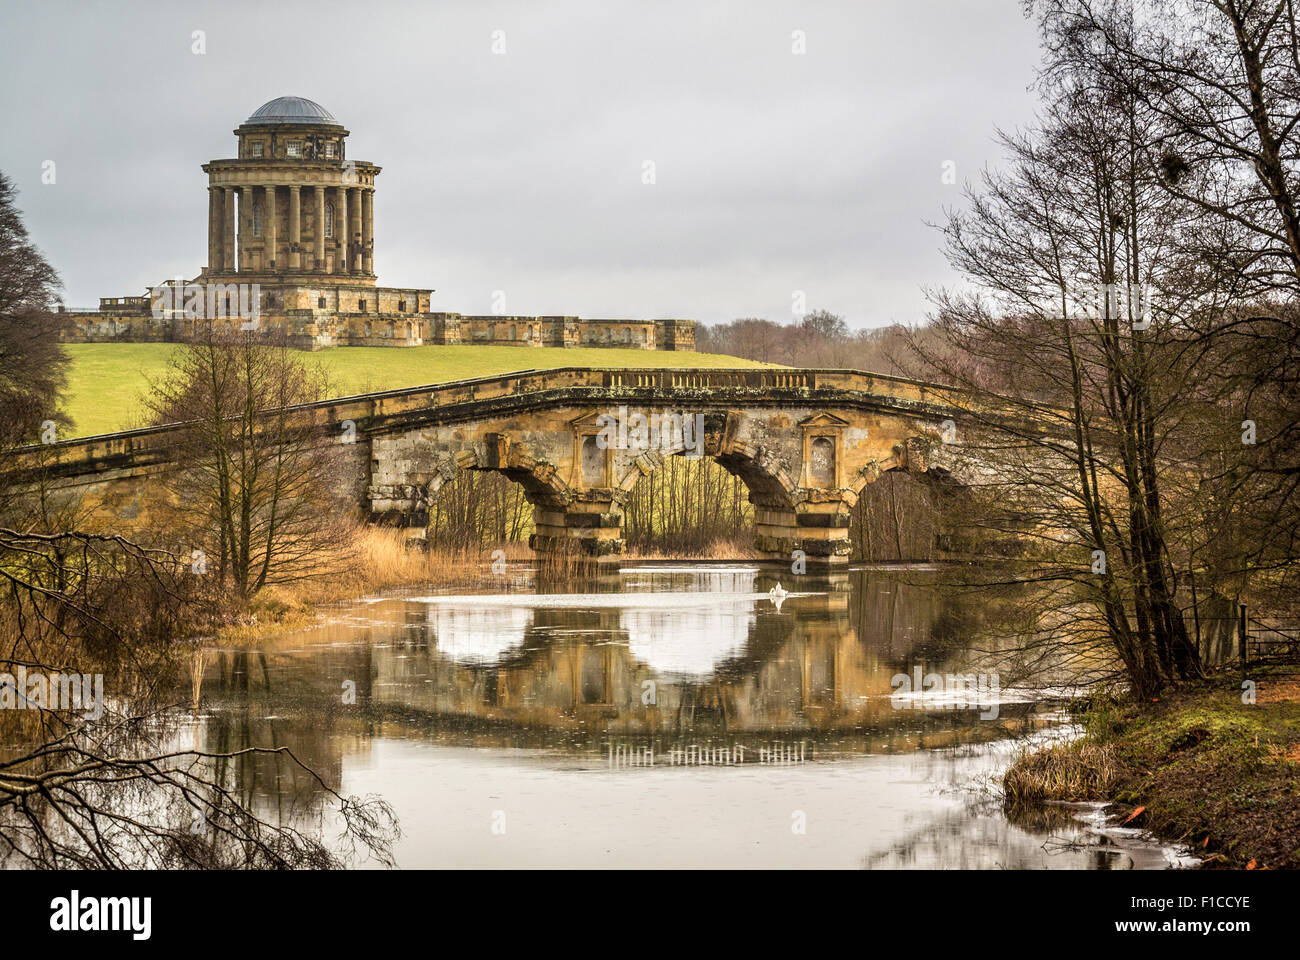 Castle Howard, New River Bridge with Mausoleum in background. Stock Photo